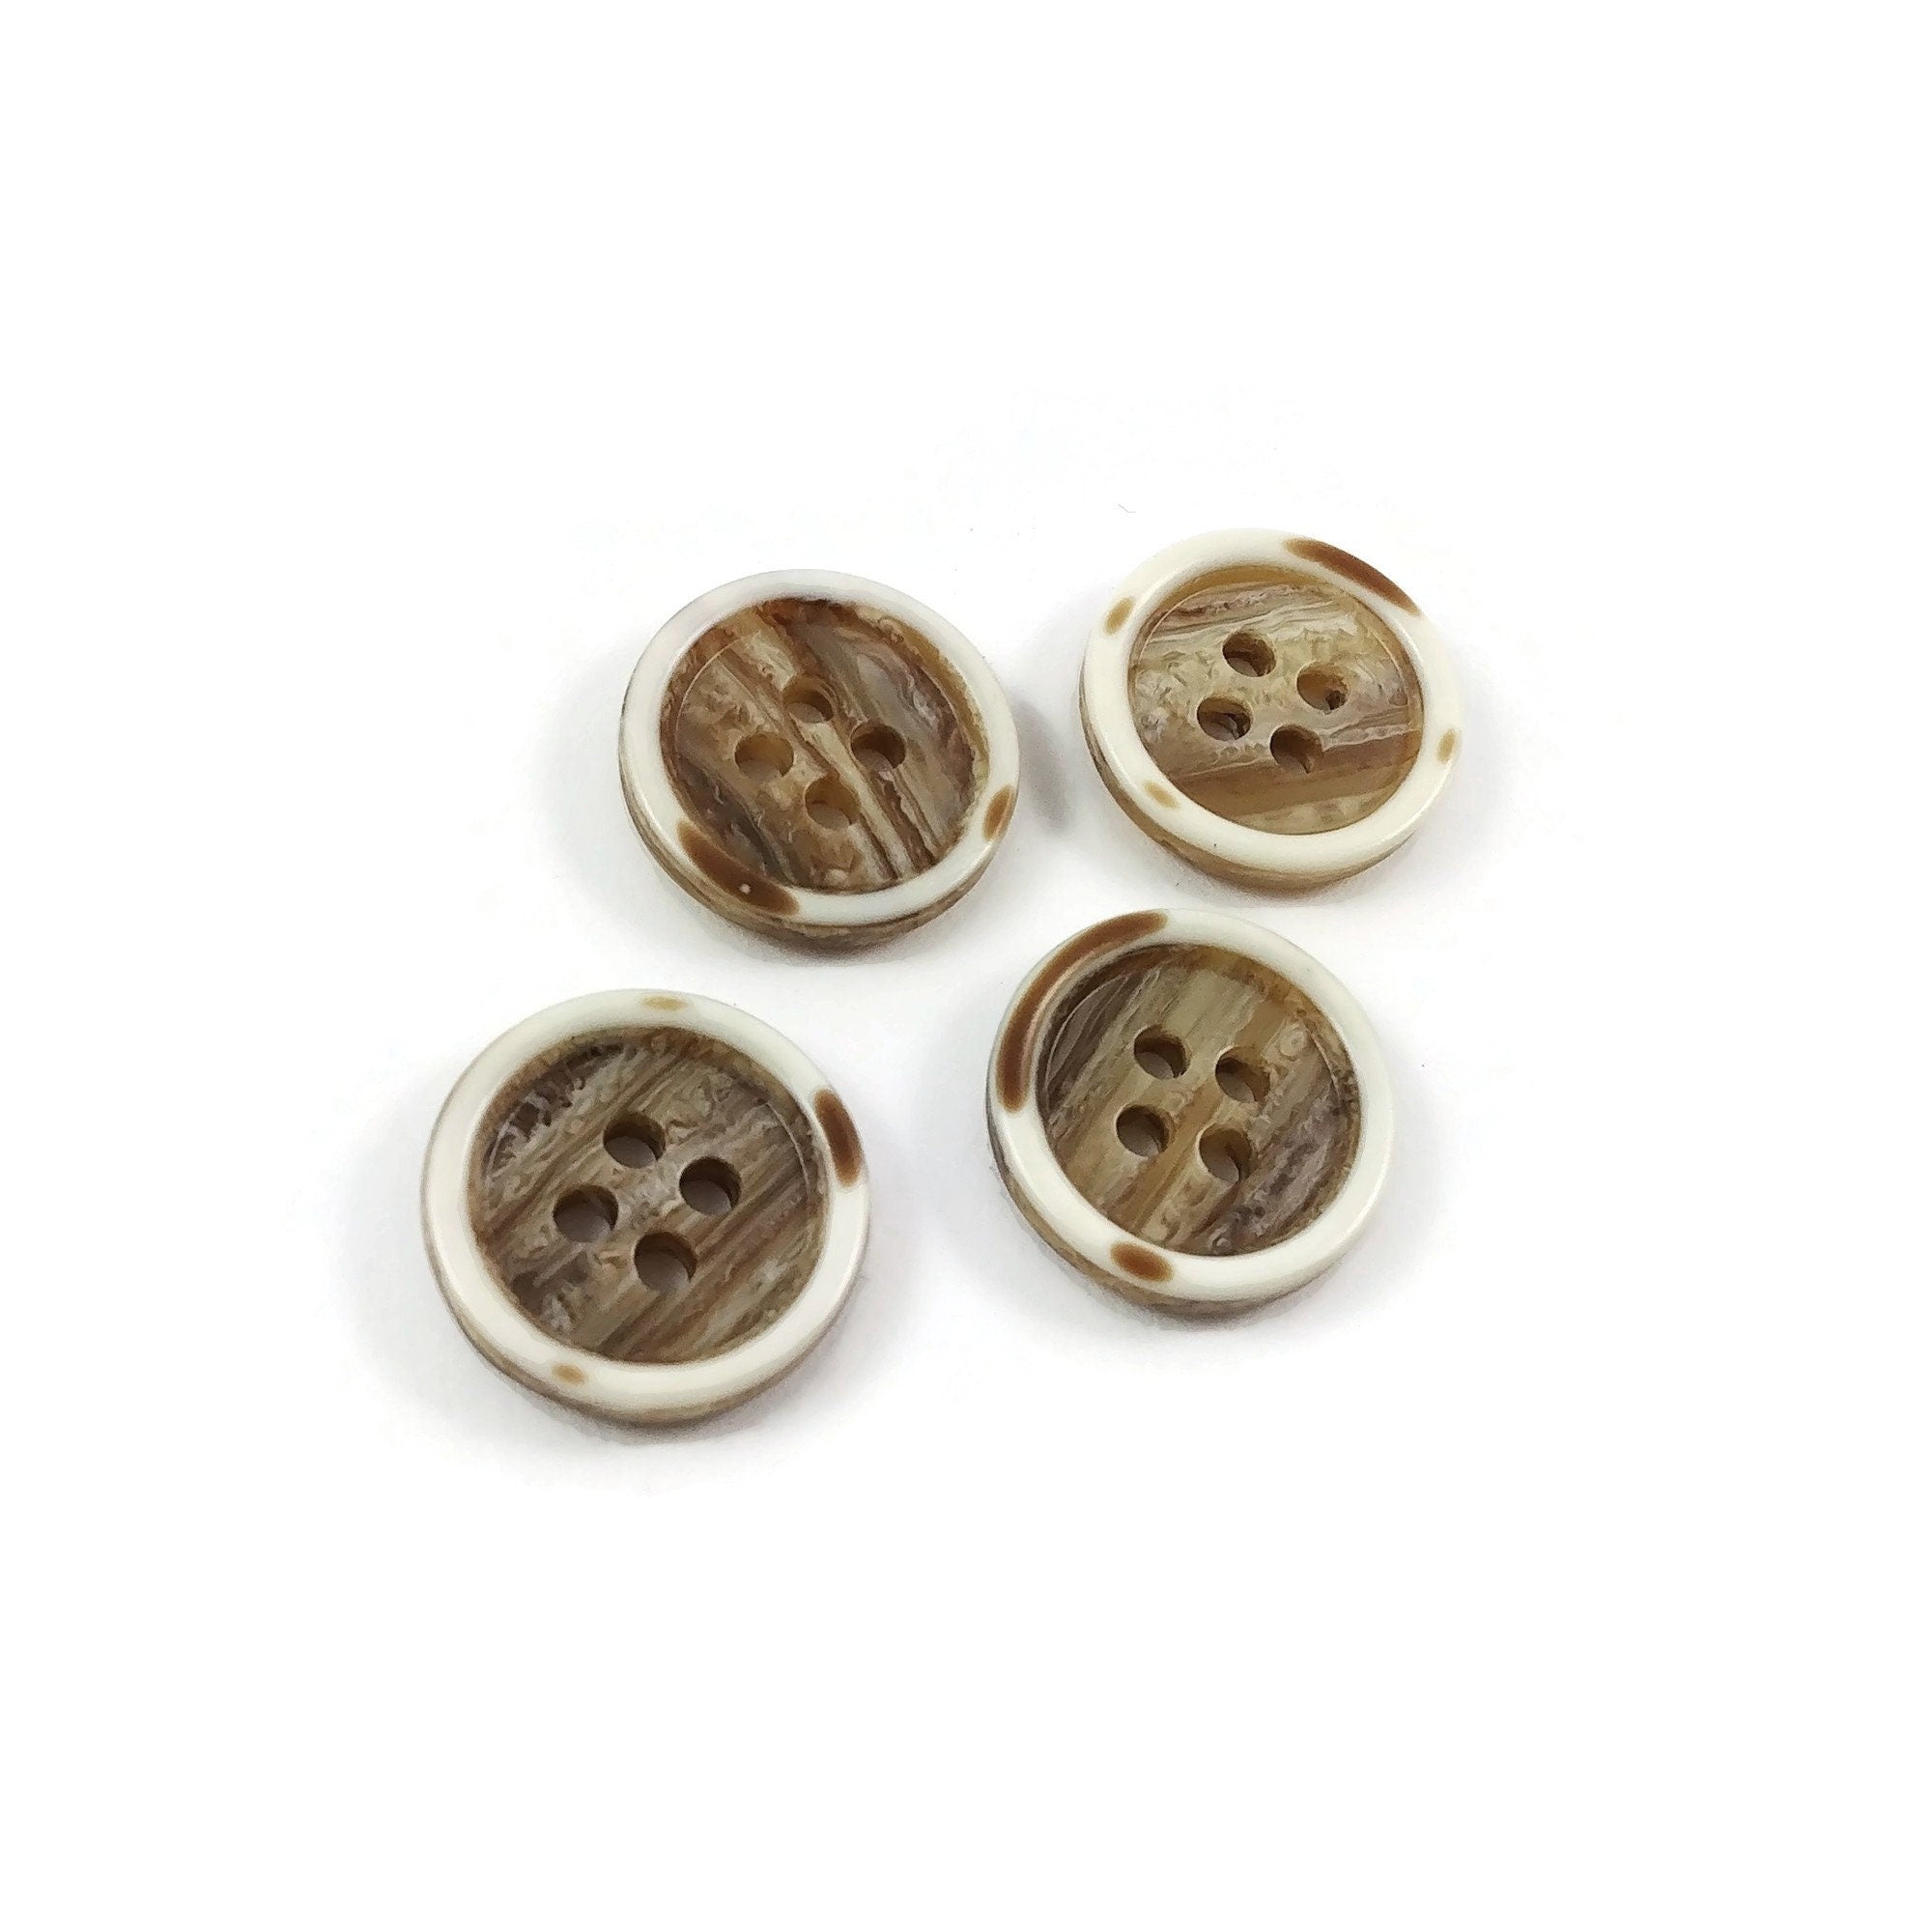 4 beige resin sewing buttons - Pick your size: 15mm, 20mm, or 25mm